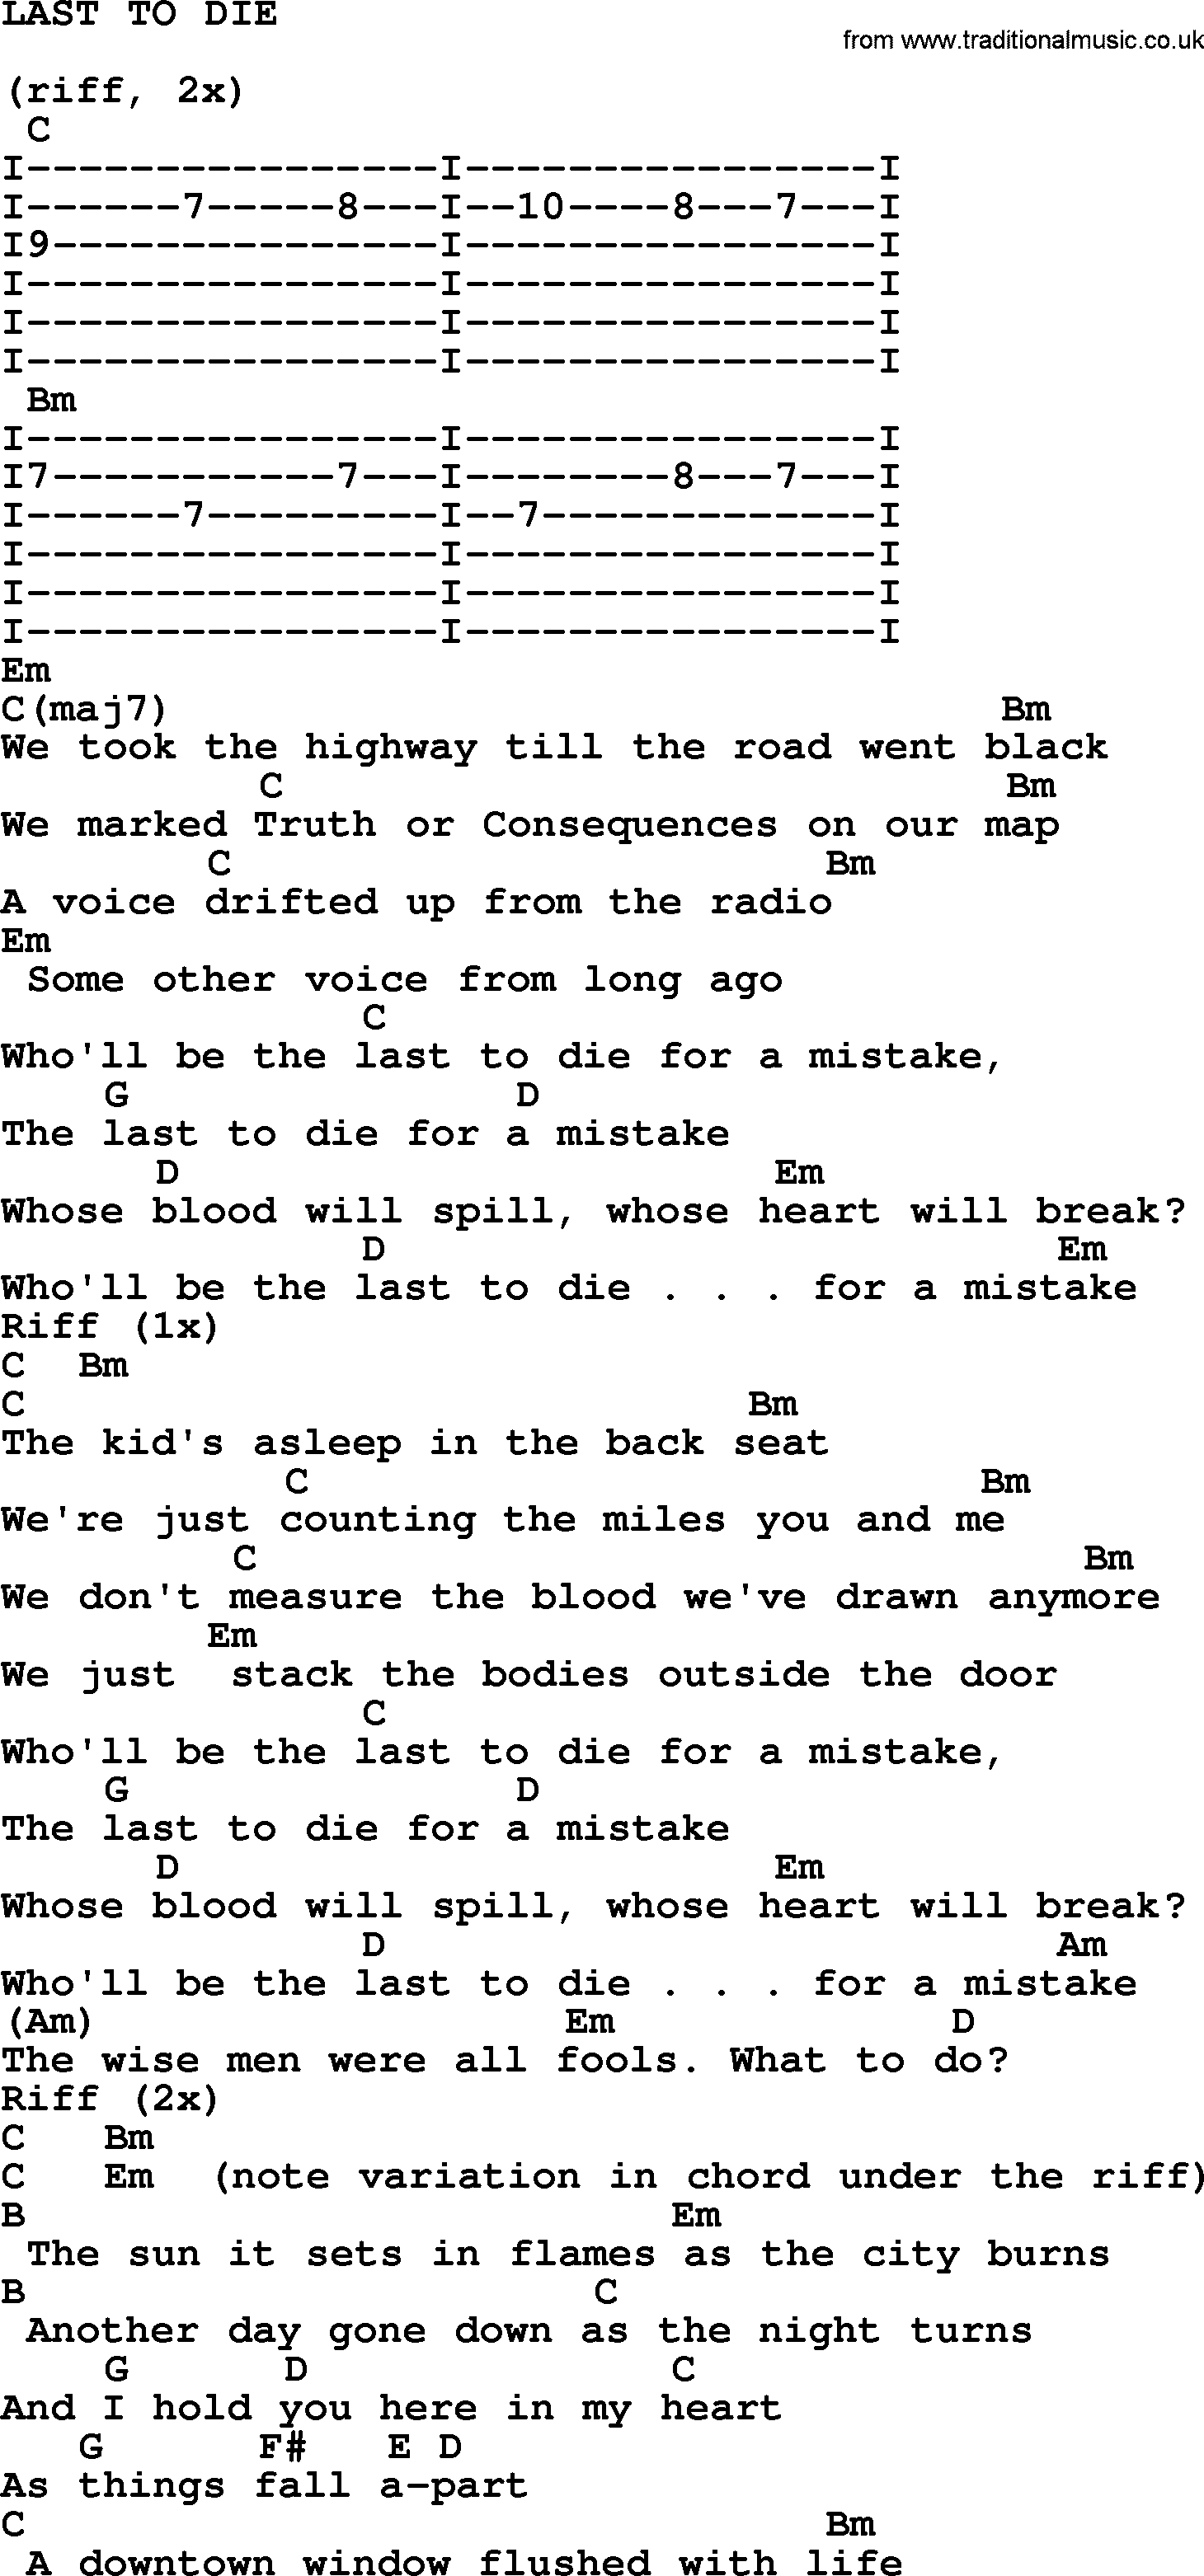 Bruce Springsteen song: Last To Die, lyrics and chords